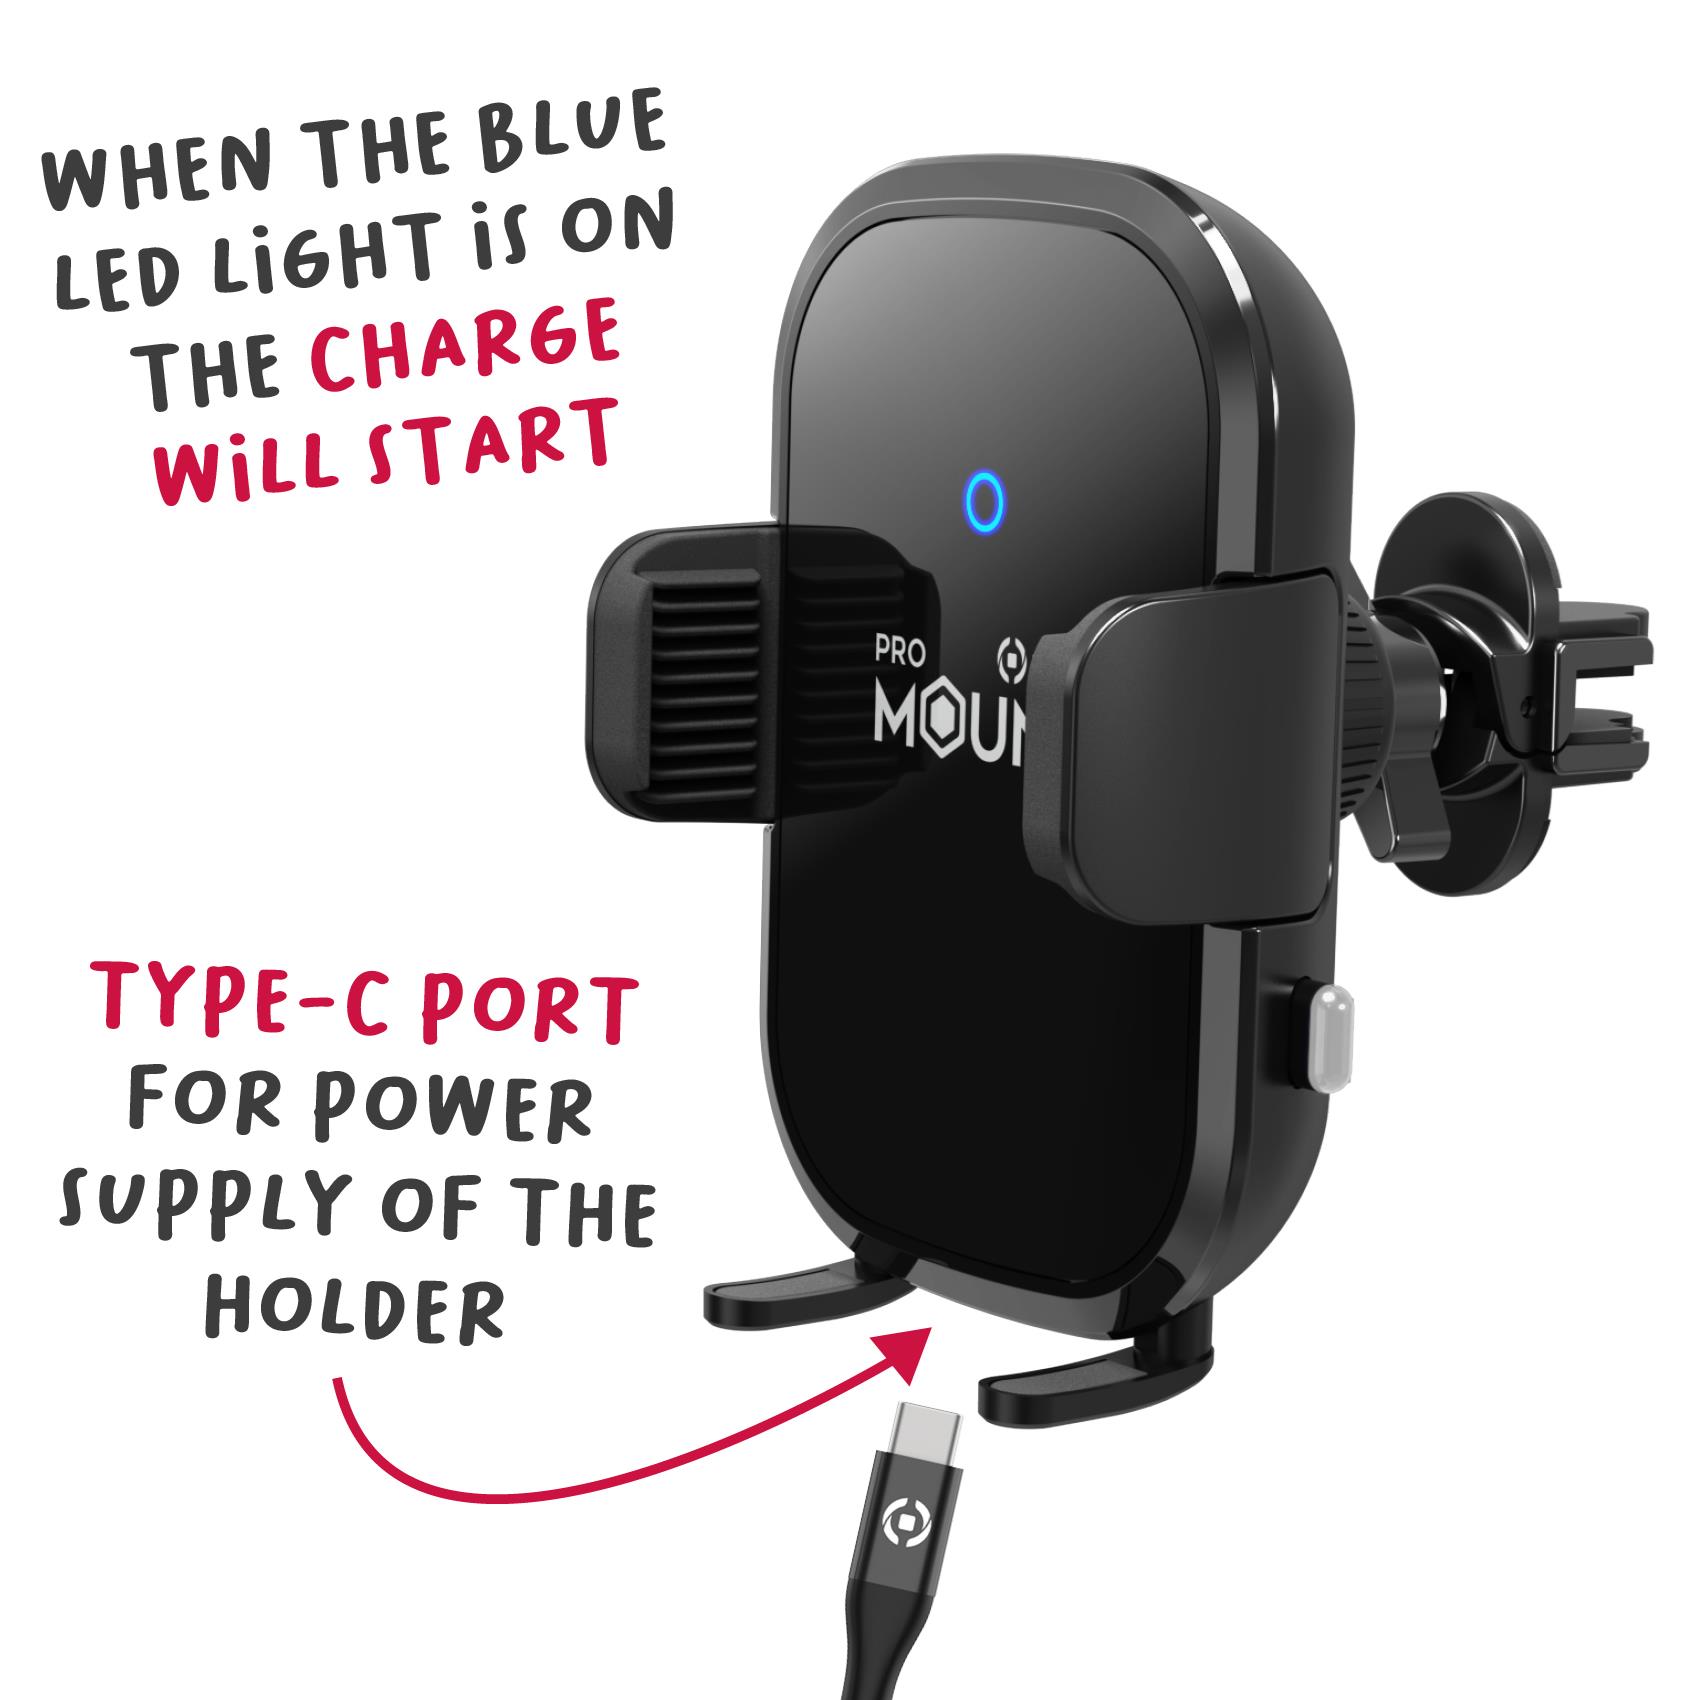 MOUNTCHARGE15 - Wireless Charger Car Holder 15W